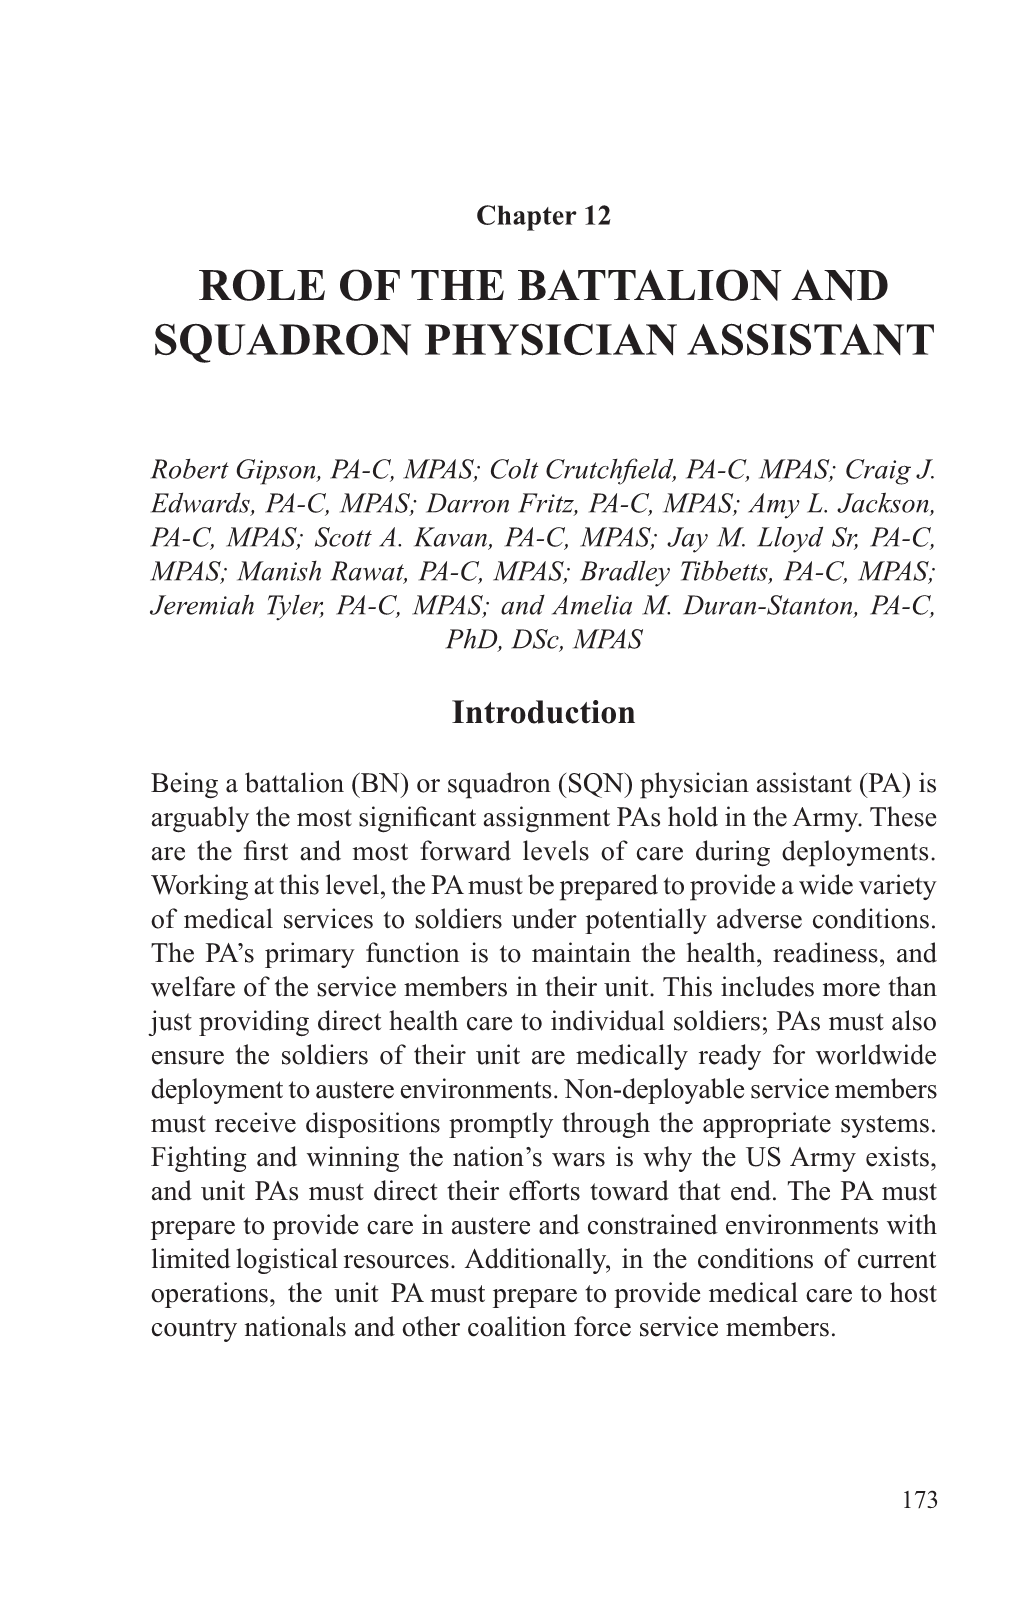 Role of the Battalion and Squadron Physician Assistant